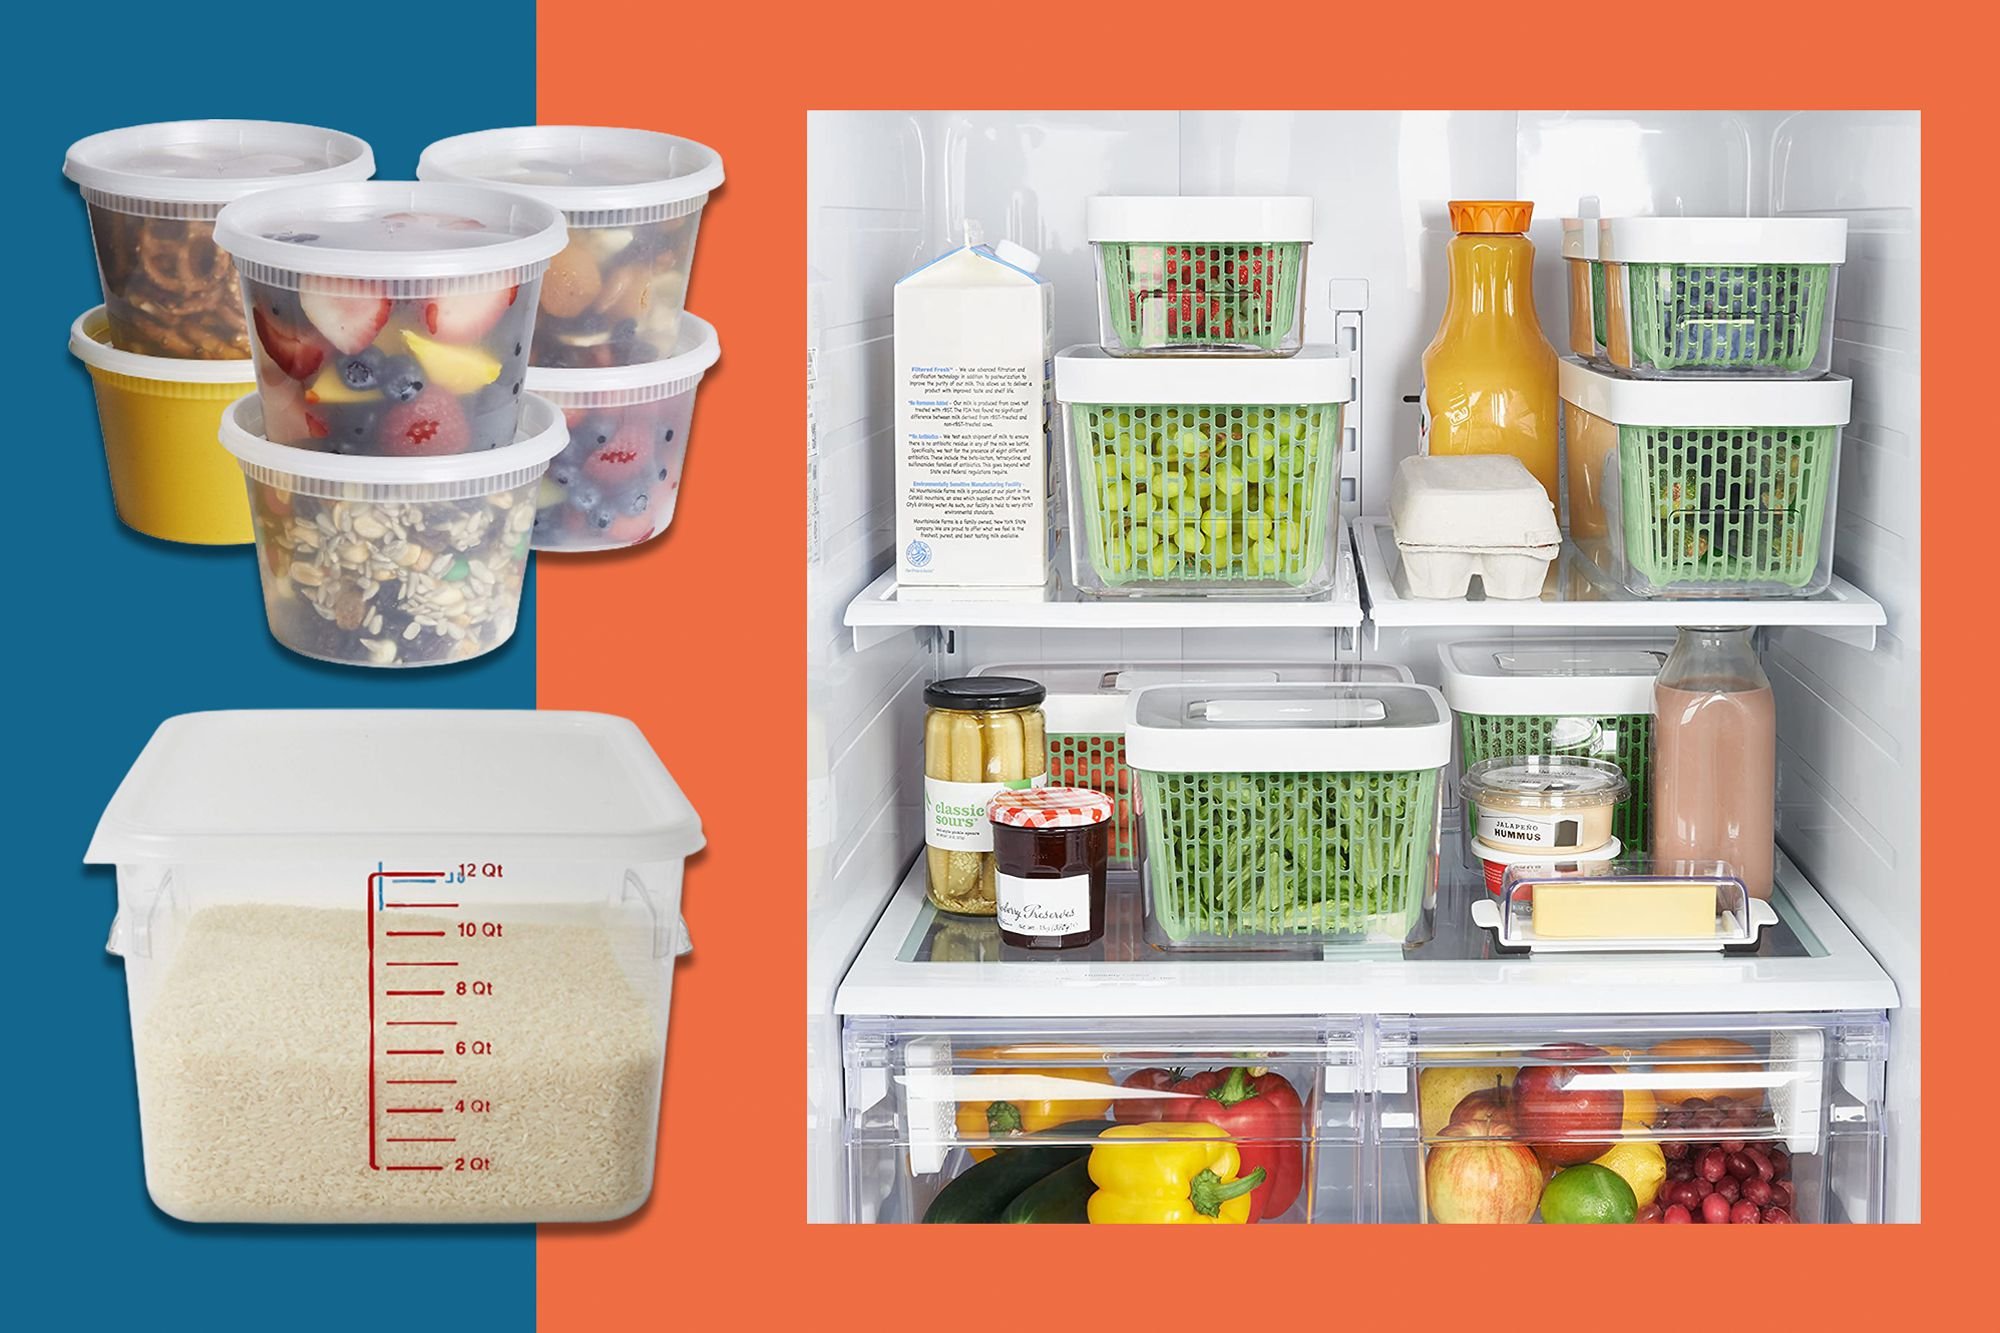 You Should Be Organizing Your Refrigerator Like a Chef – Here's How